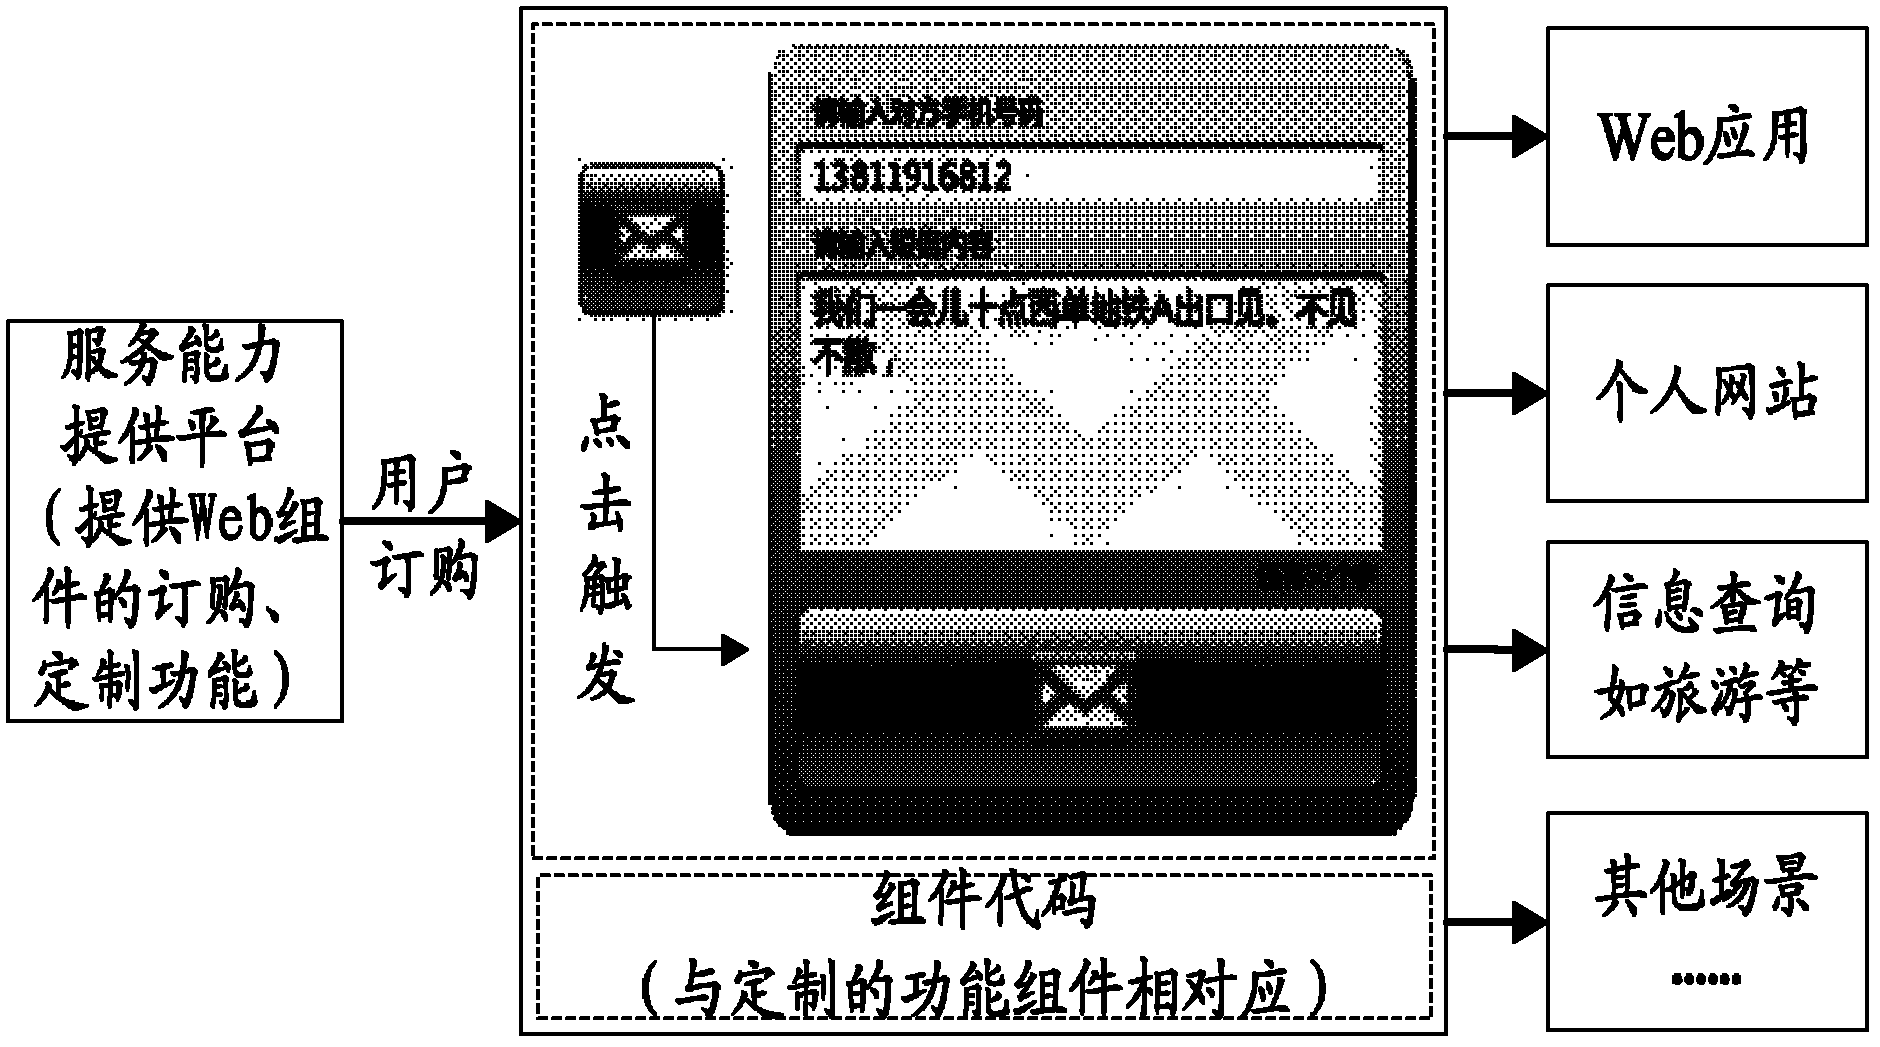 Short-message sending service system based on Web Element mechanism and operating method thereof